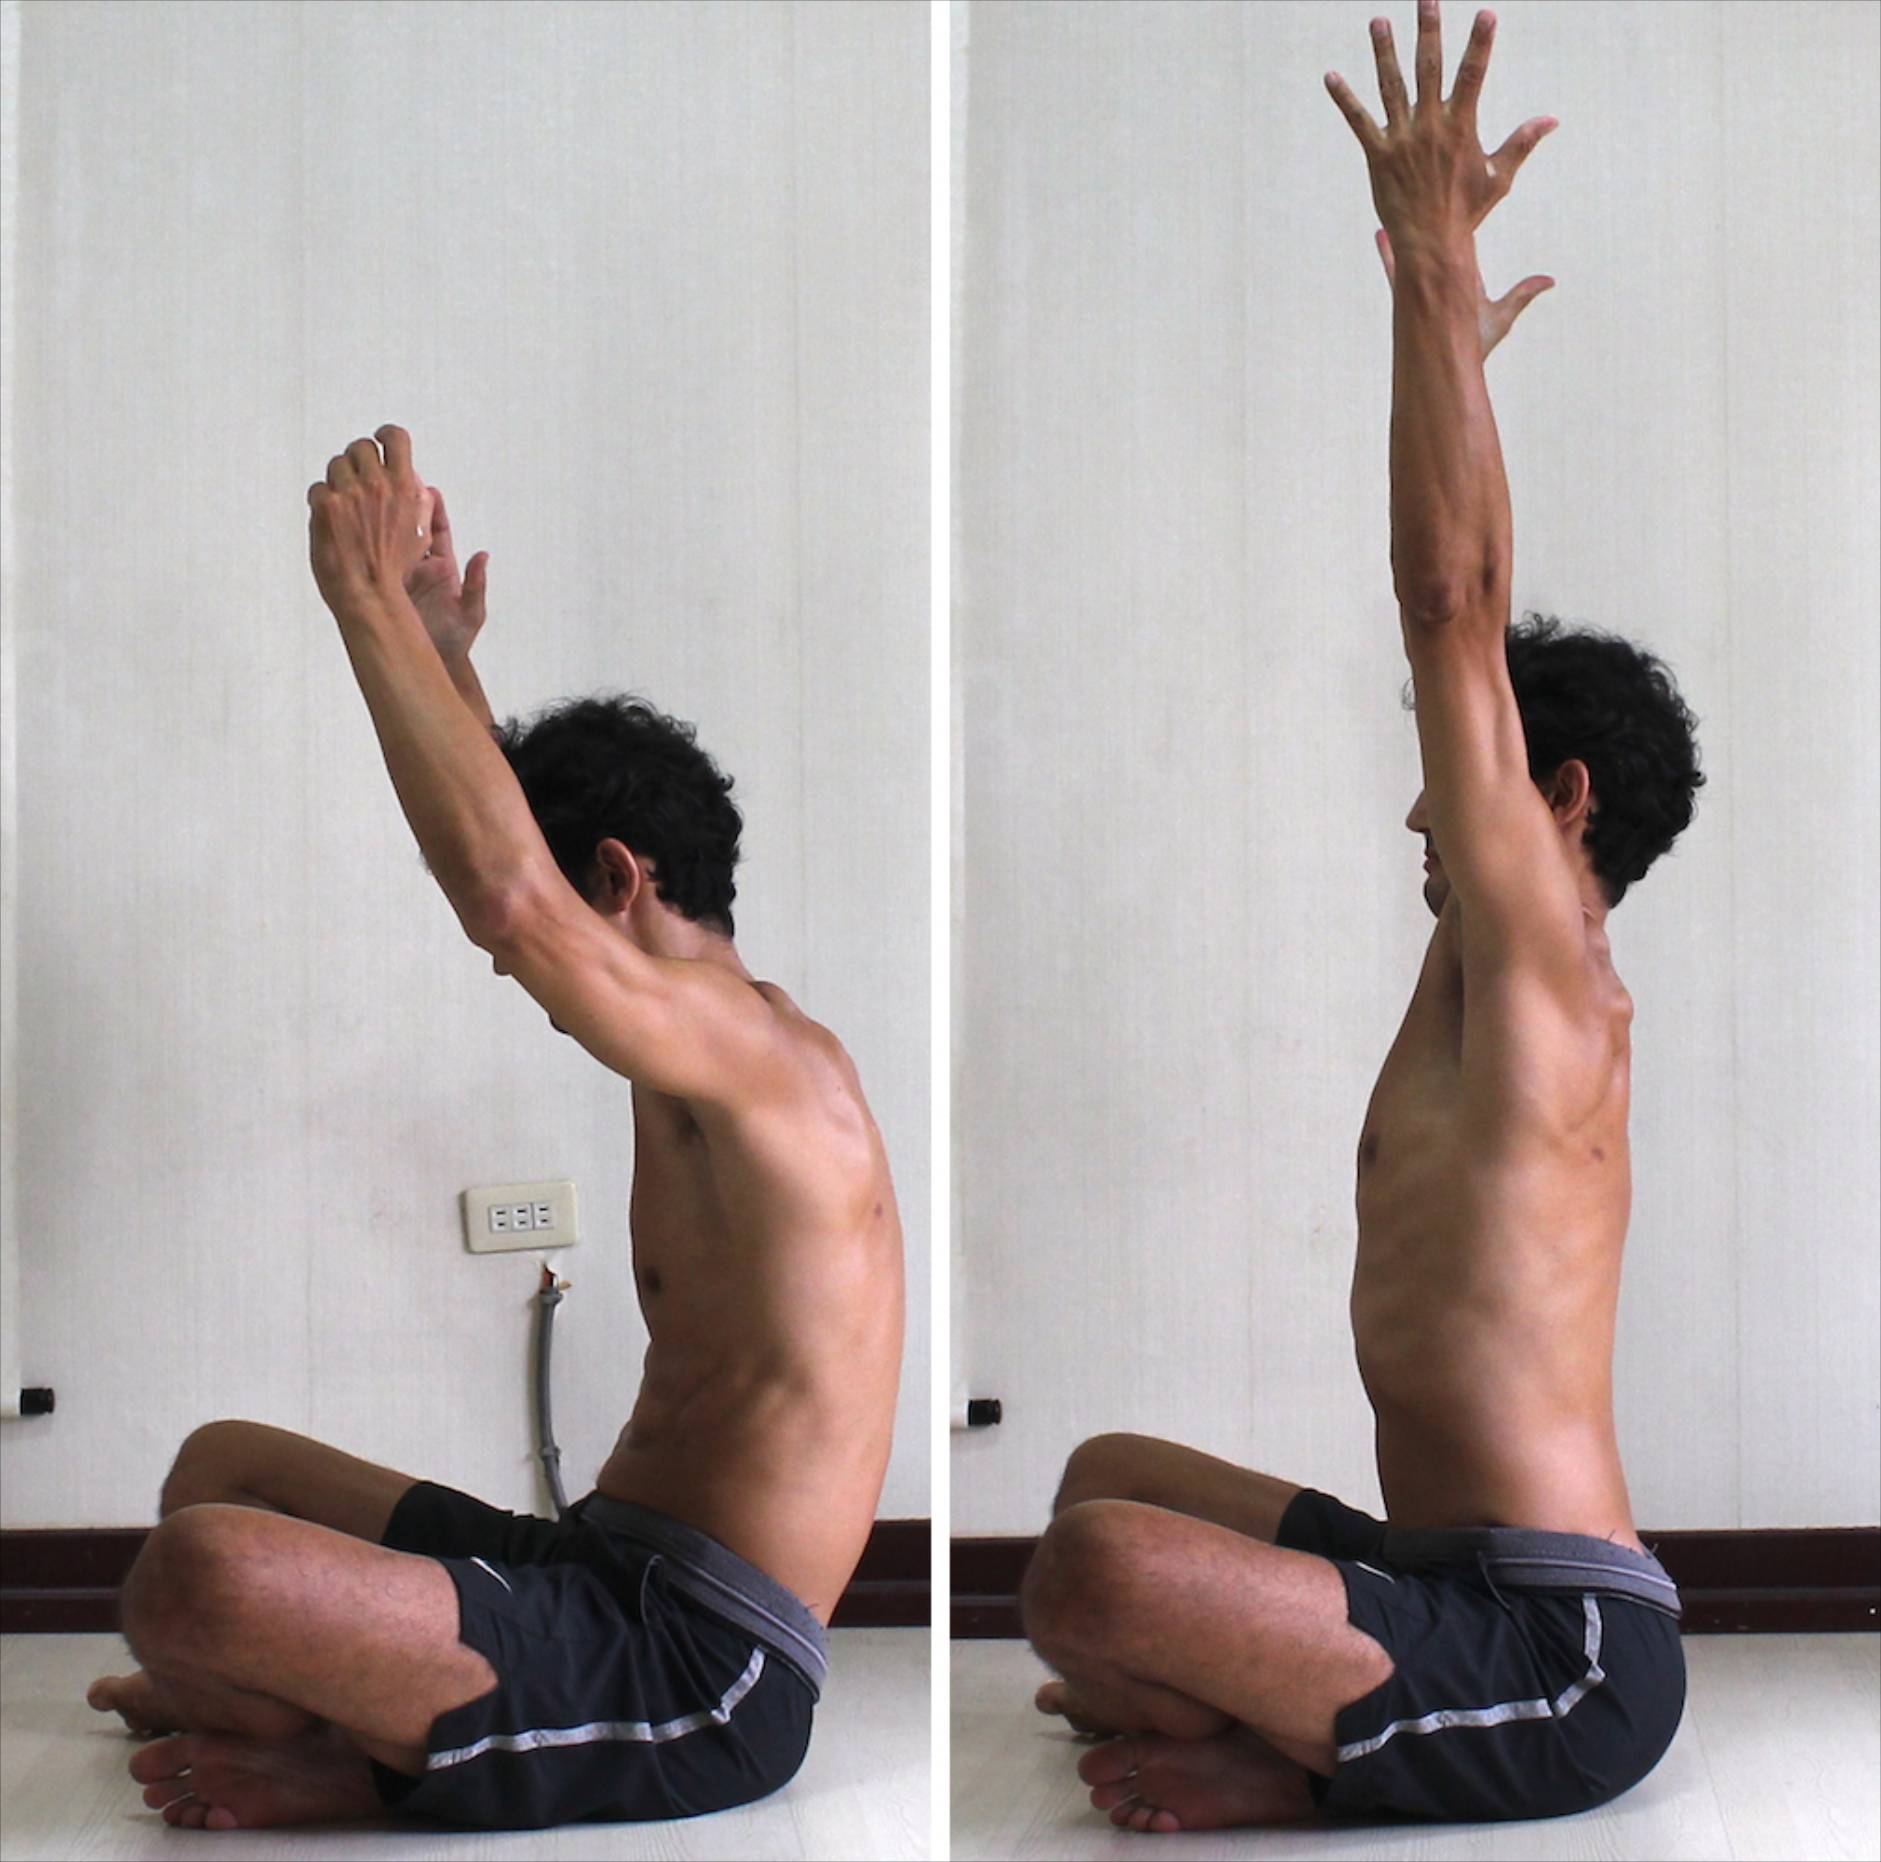 Lengthening Spine and Arms Upwards:  
1. Relaxed.  
2. Sitting up tall with front ribs lifted away from the floor and arms reaching upwards.   
(Shoulders are lifted,   
Elbows and fingers are straight.    
Neck is long.)
